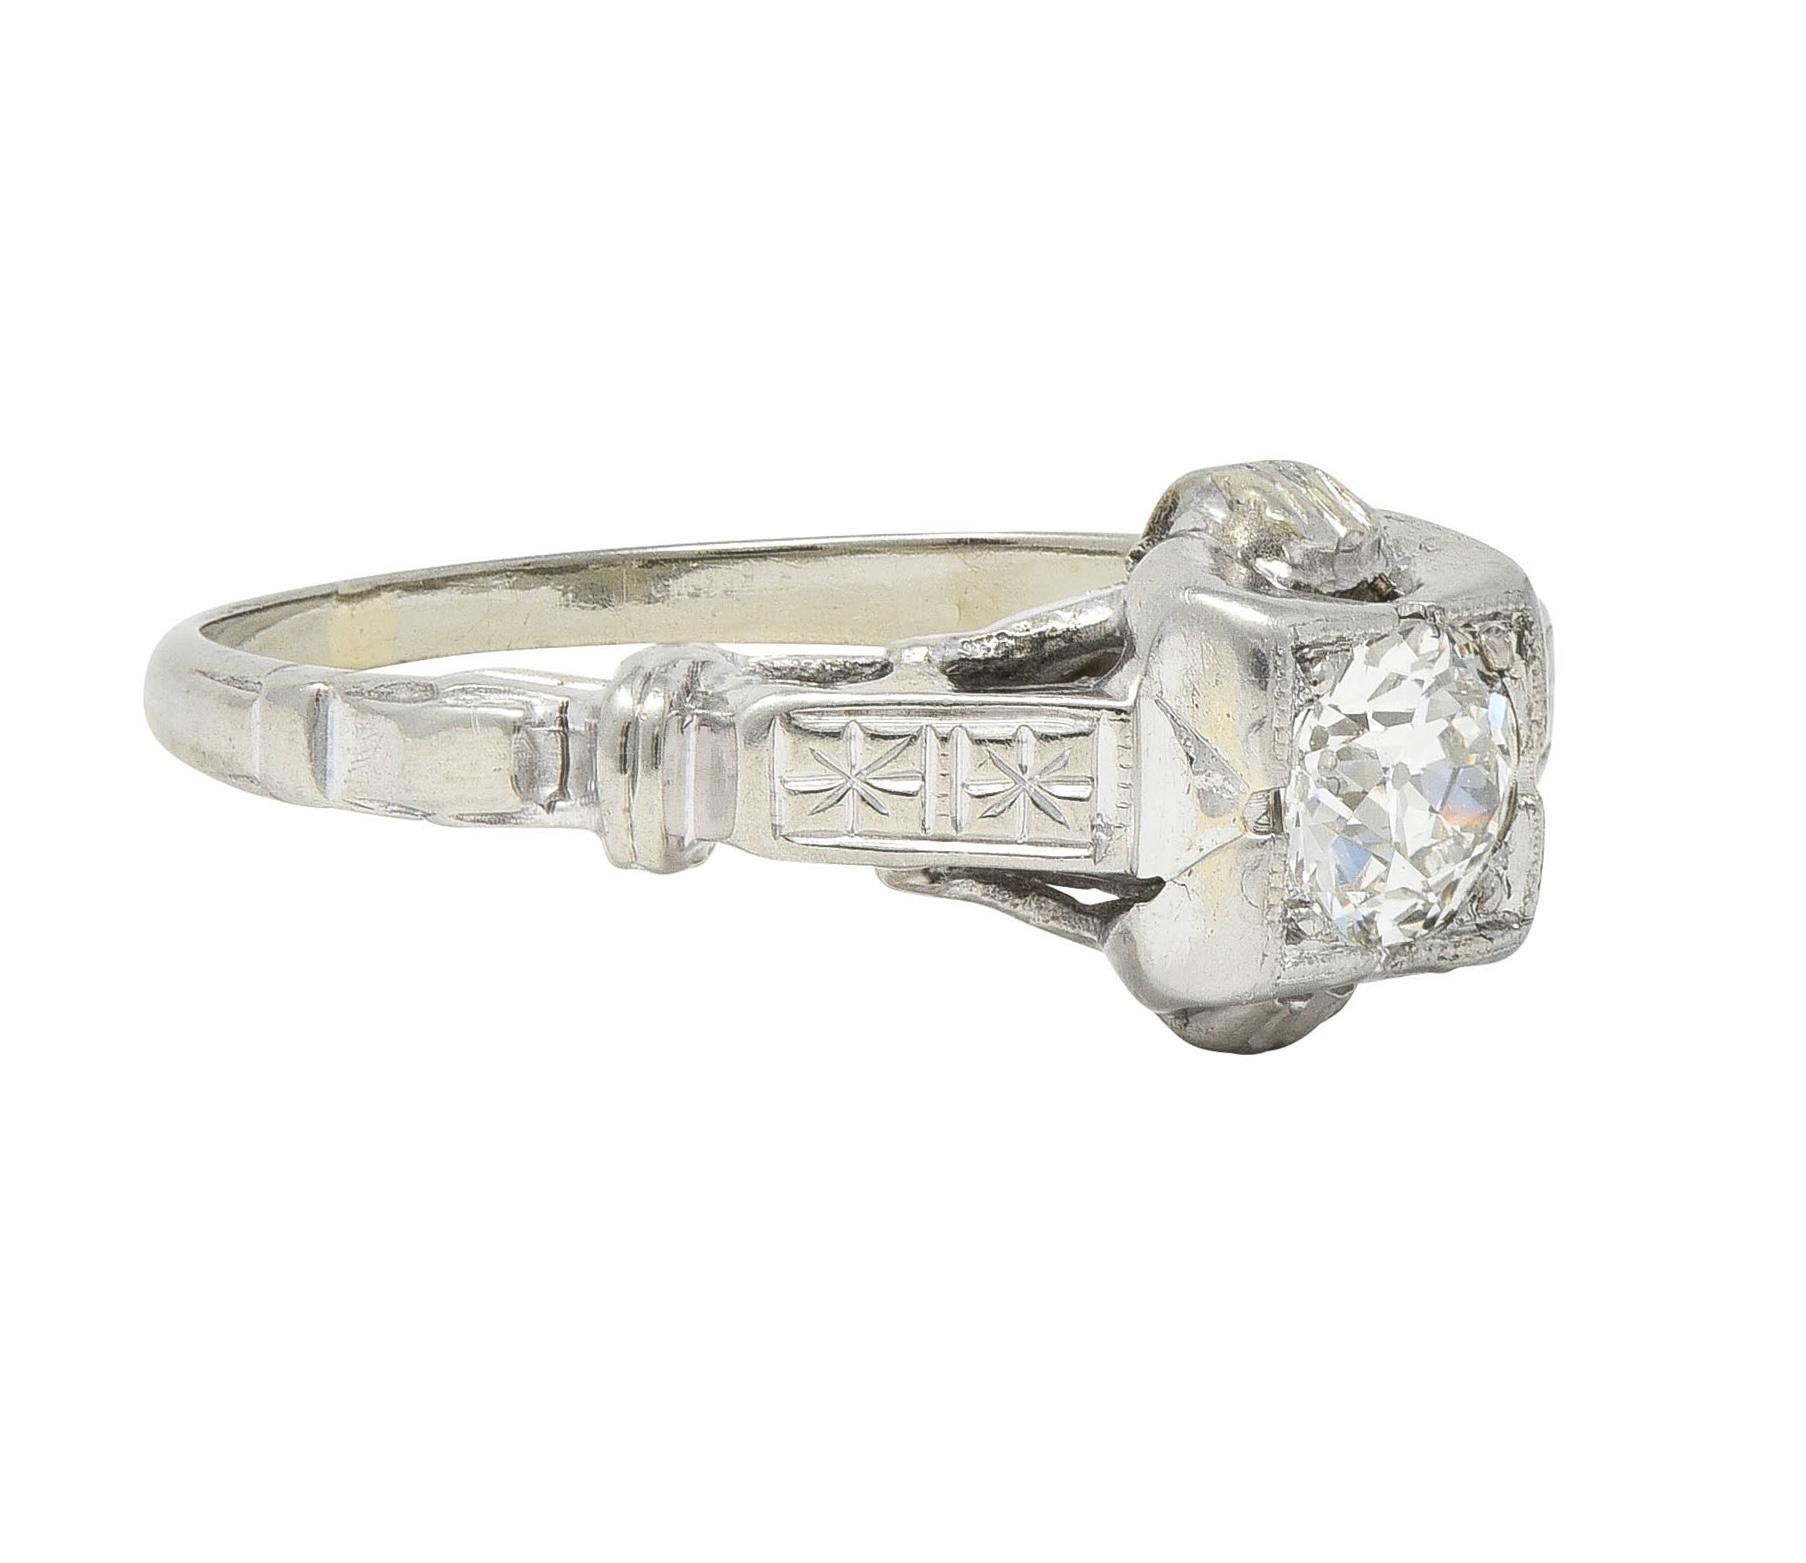 Centering an old European cut diamond weighing approximately 0.40 carat 
J color with VS2 clarity - bead set in a grooved square form head
With grooved buckle motif profile - flanked by cathedral shoulders
Engraved with orange blossom motif 
Tested